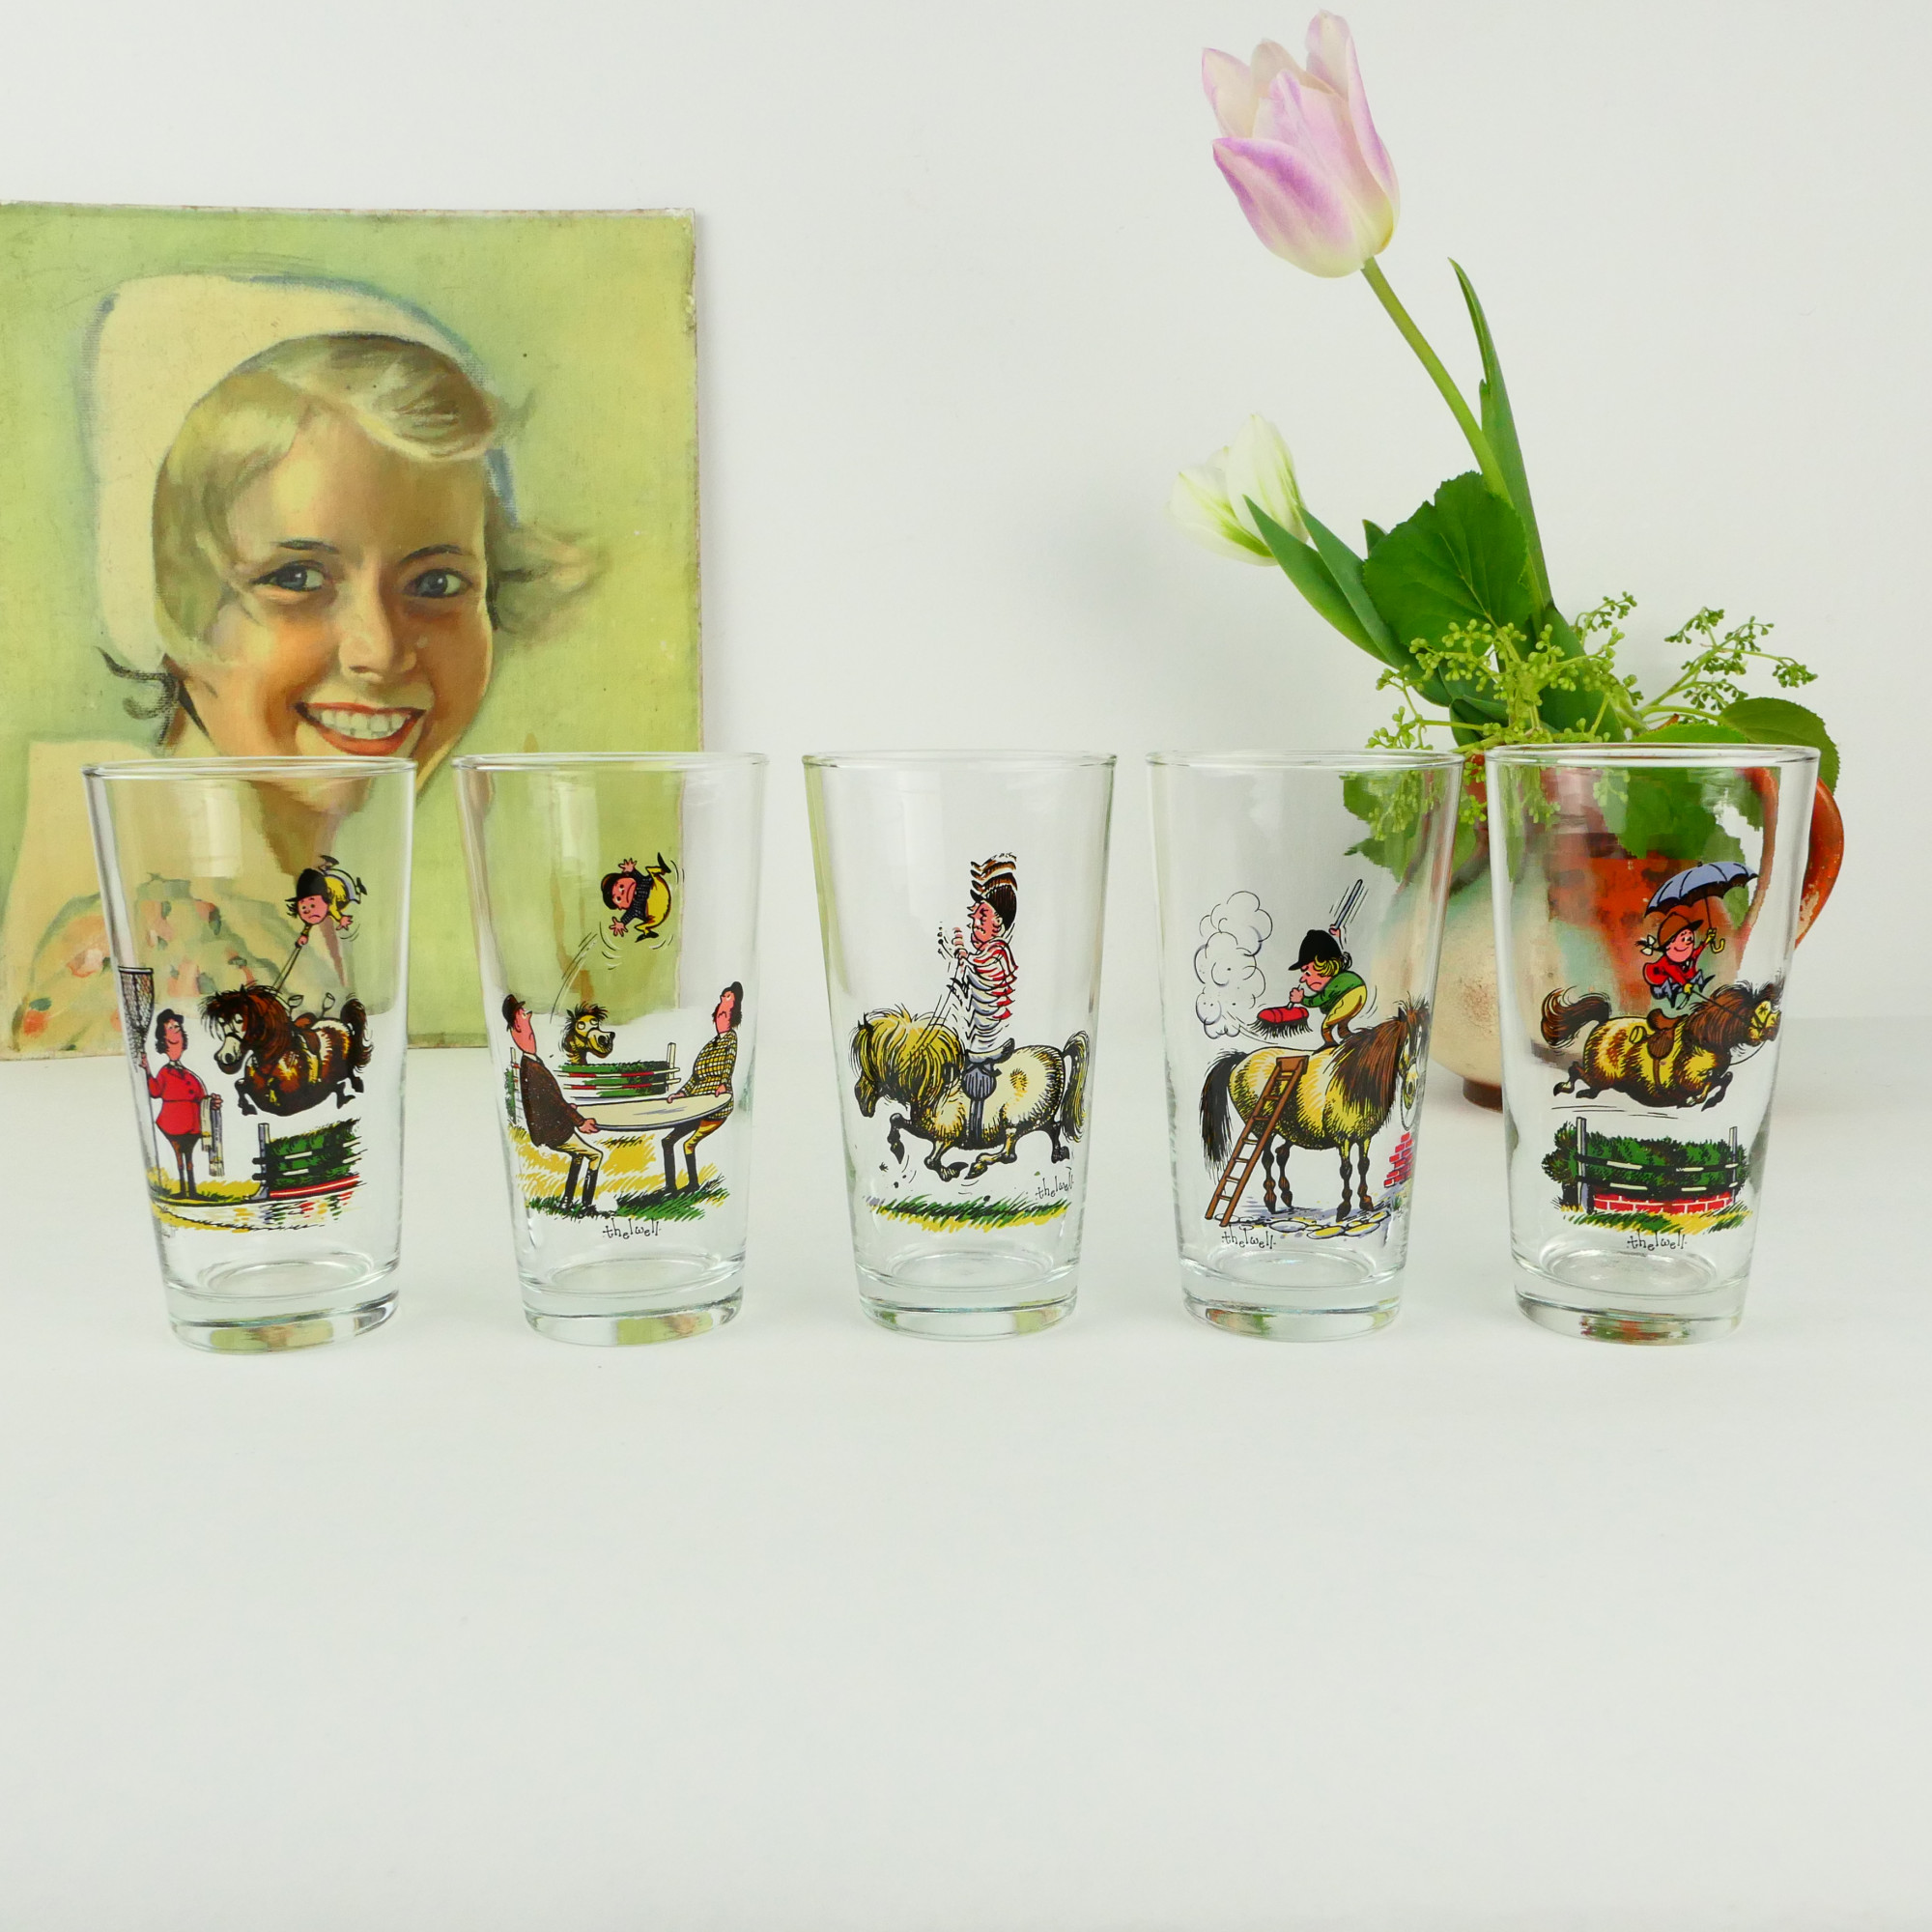 Vintage drinking glass long drink glass with pony cartoon image of  Thelwell, set of five glasses - Retroriek